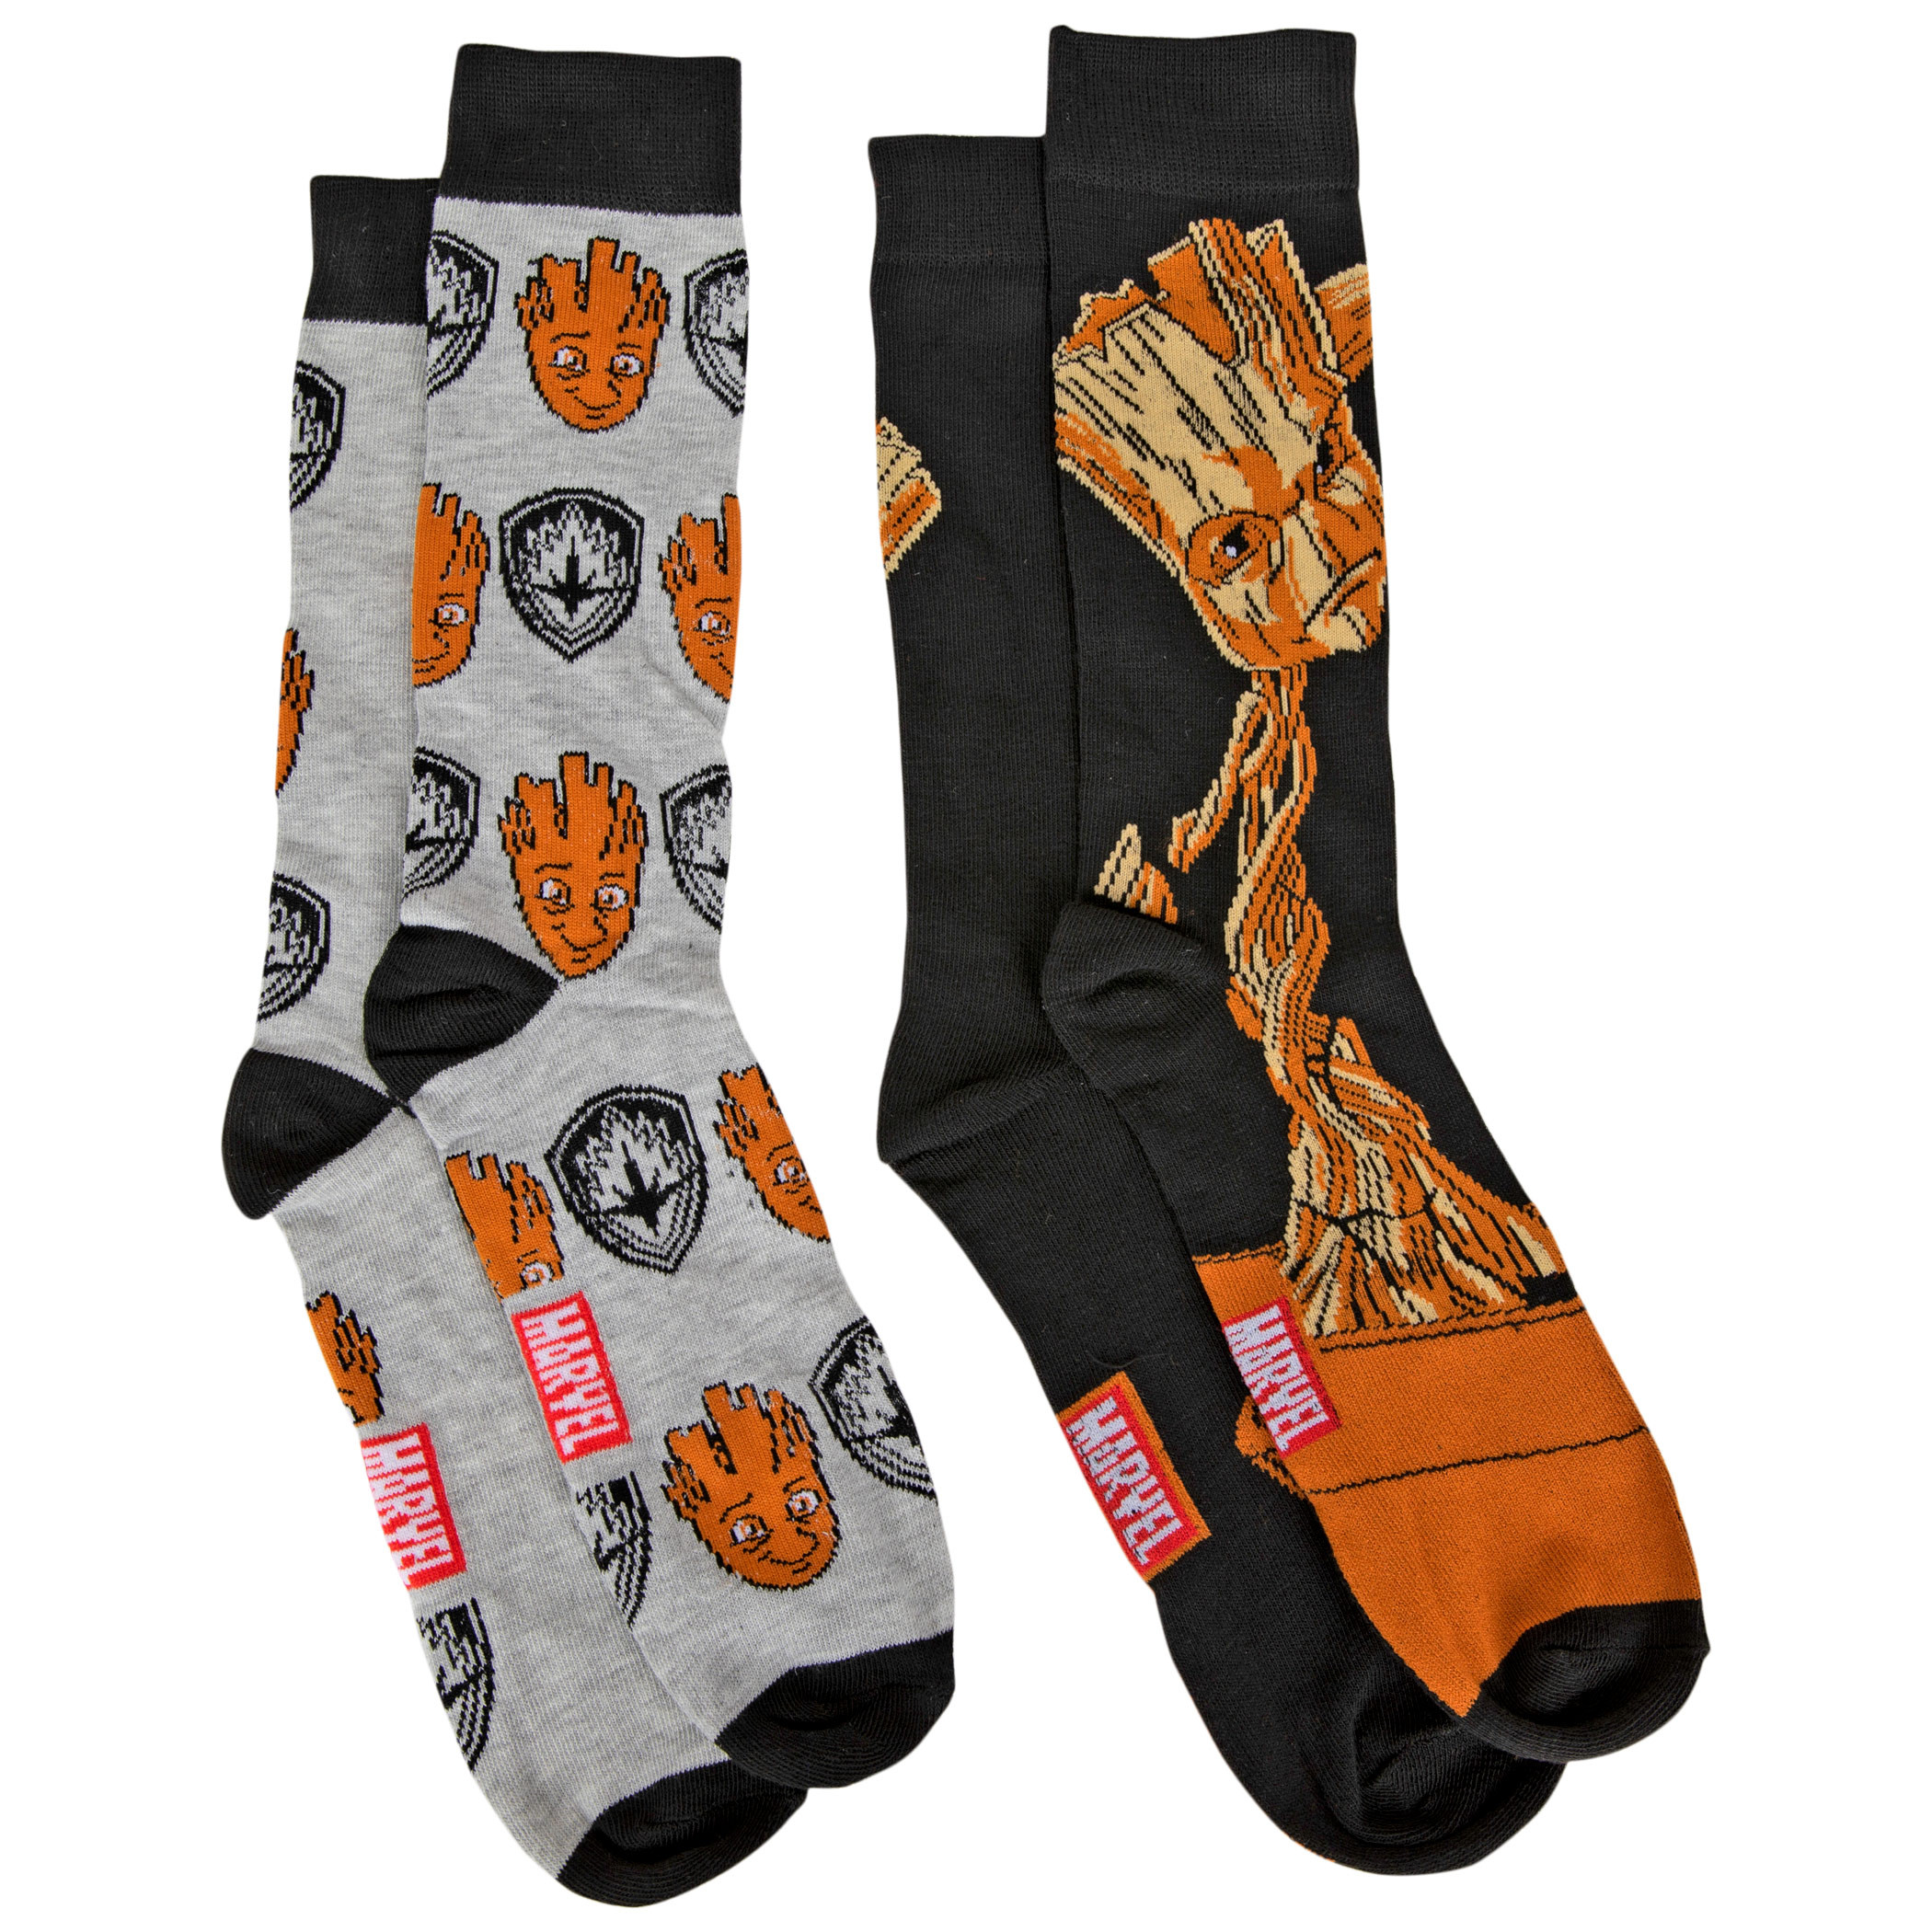 Guardians of Galaxy Groot Character and Symbols 2-Pair Pack of Crew Socks